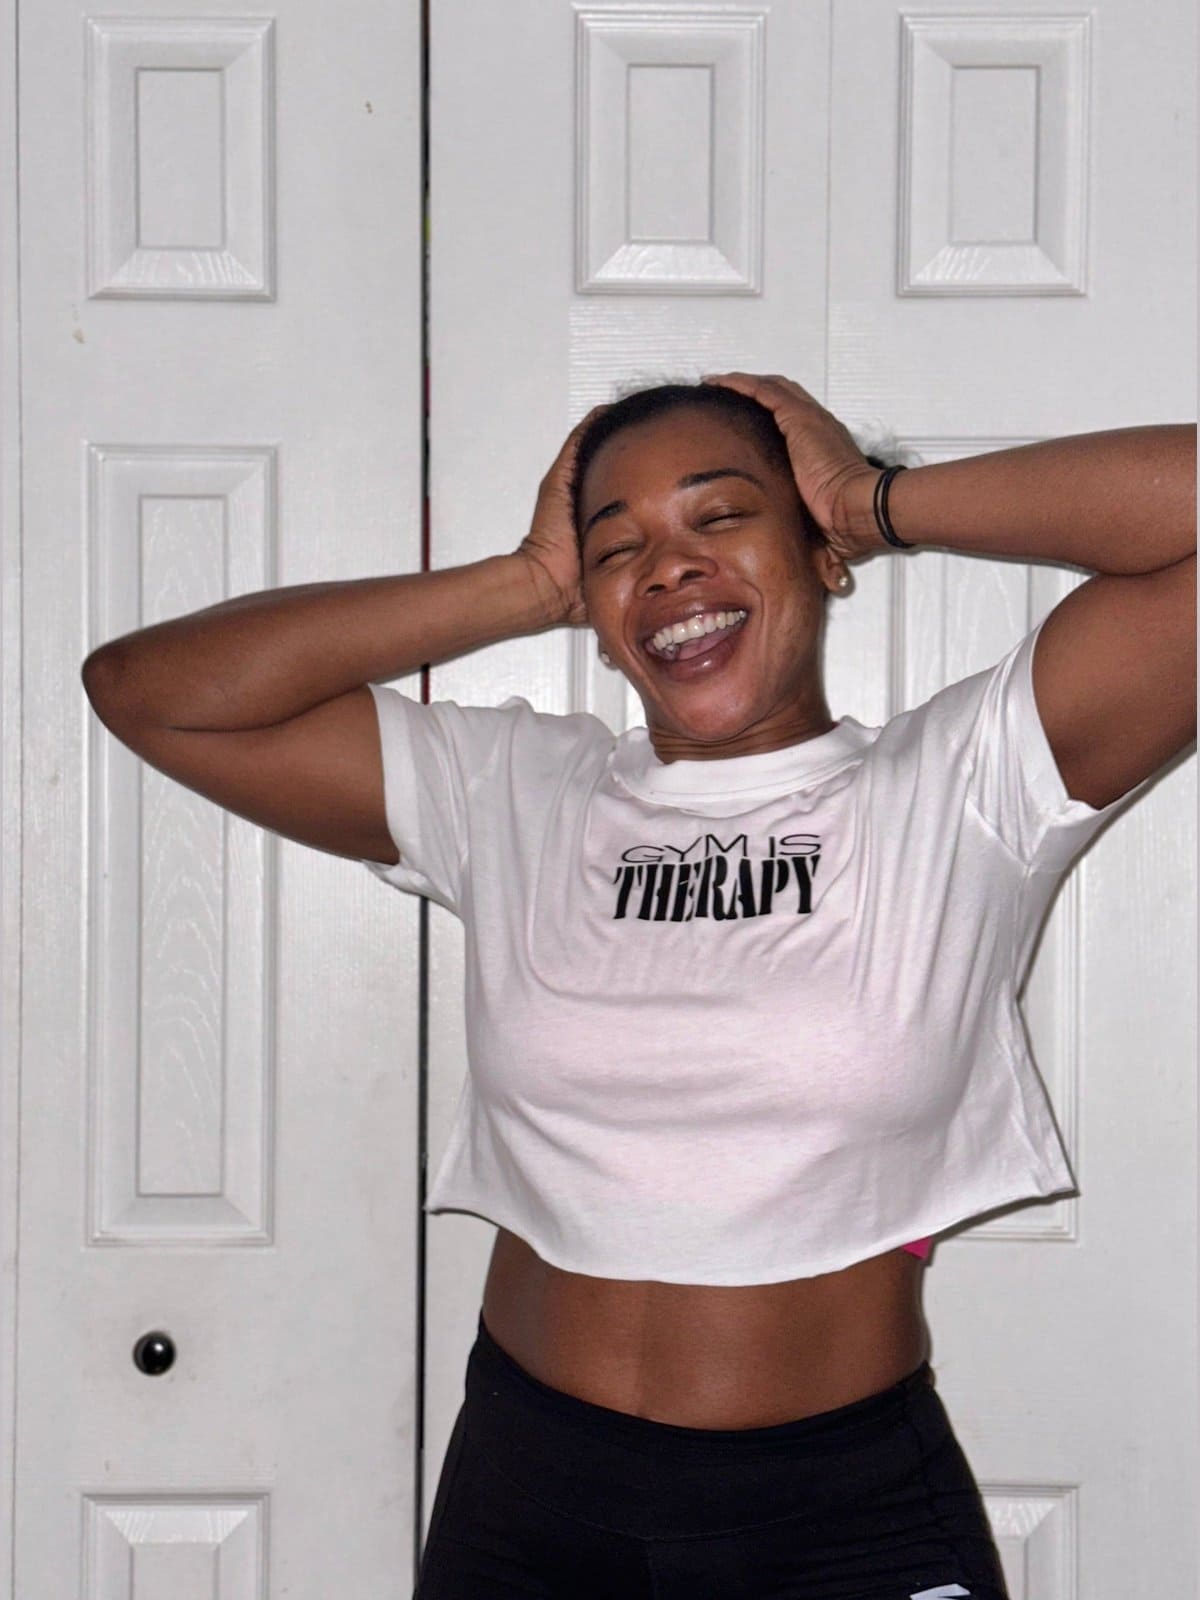 Gym Is Therapy Cropped Top - BKFJNY